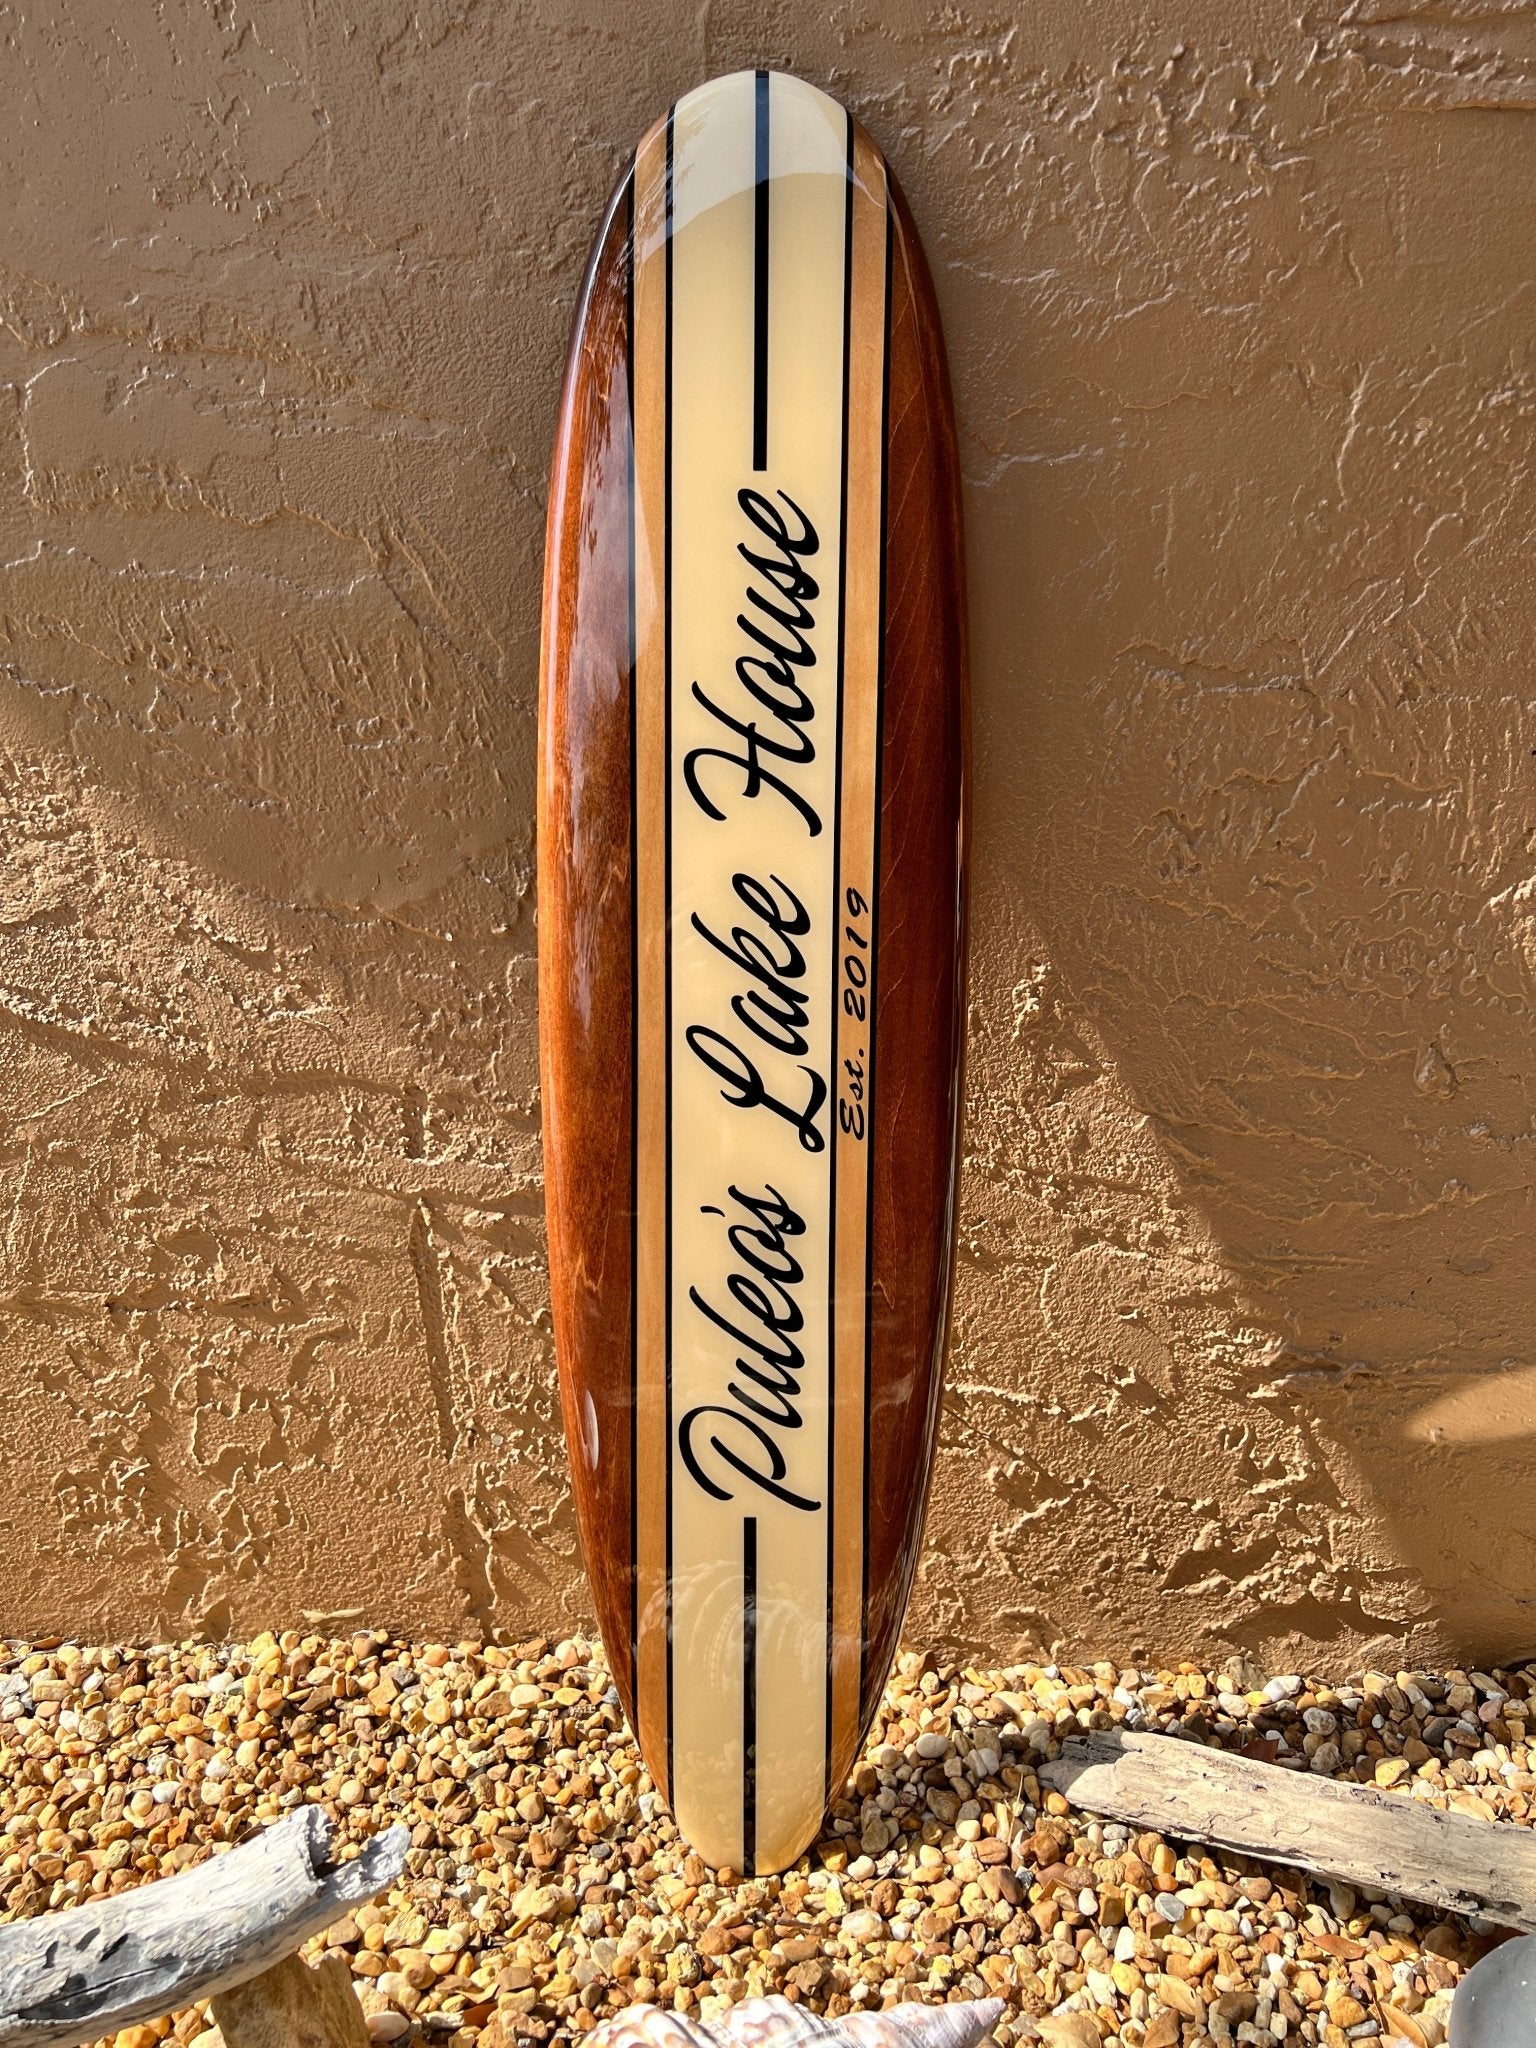 You Name It - Coastal Decor Personalized Surfboard Sign